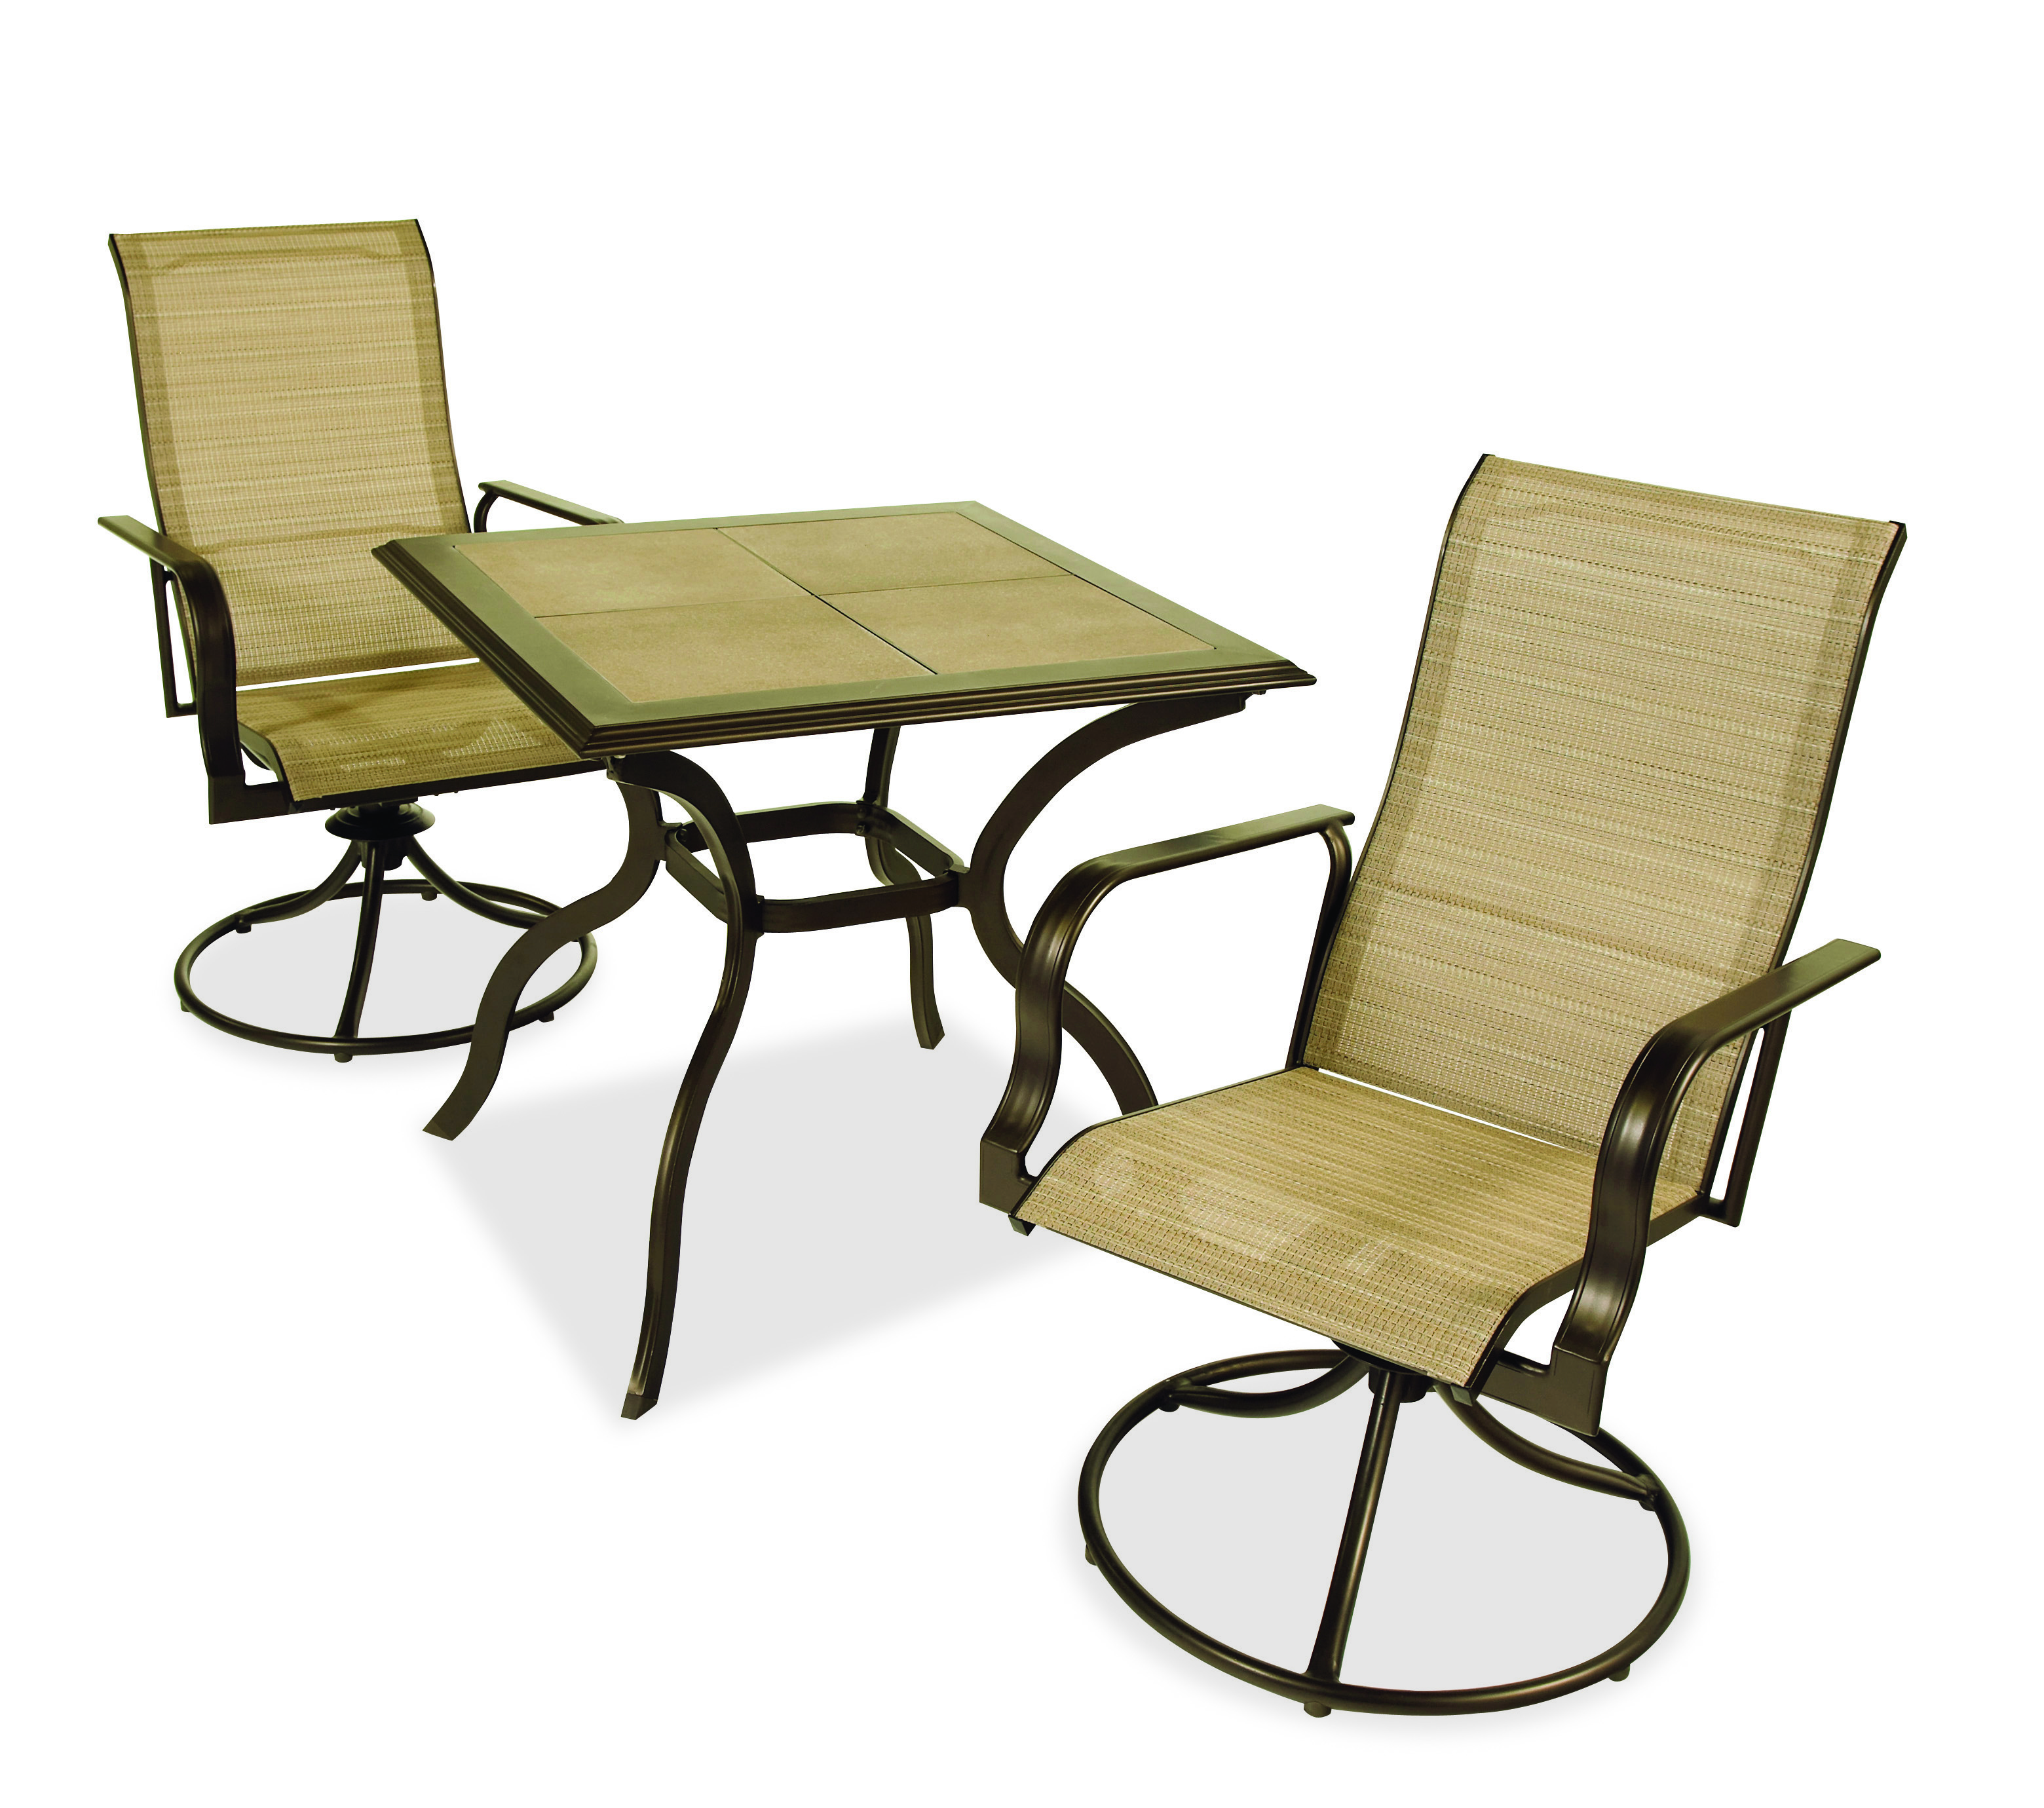 Patio Chairs Sold At Home Depot Recalled Because Porch Life